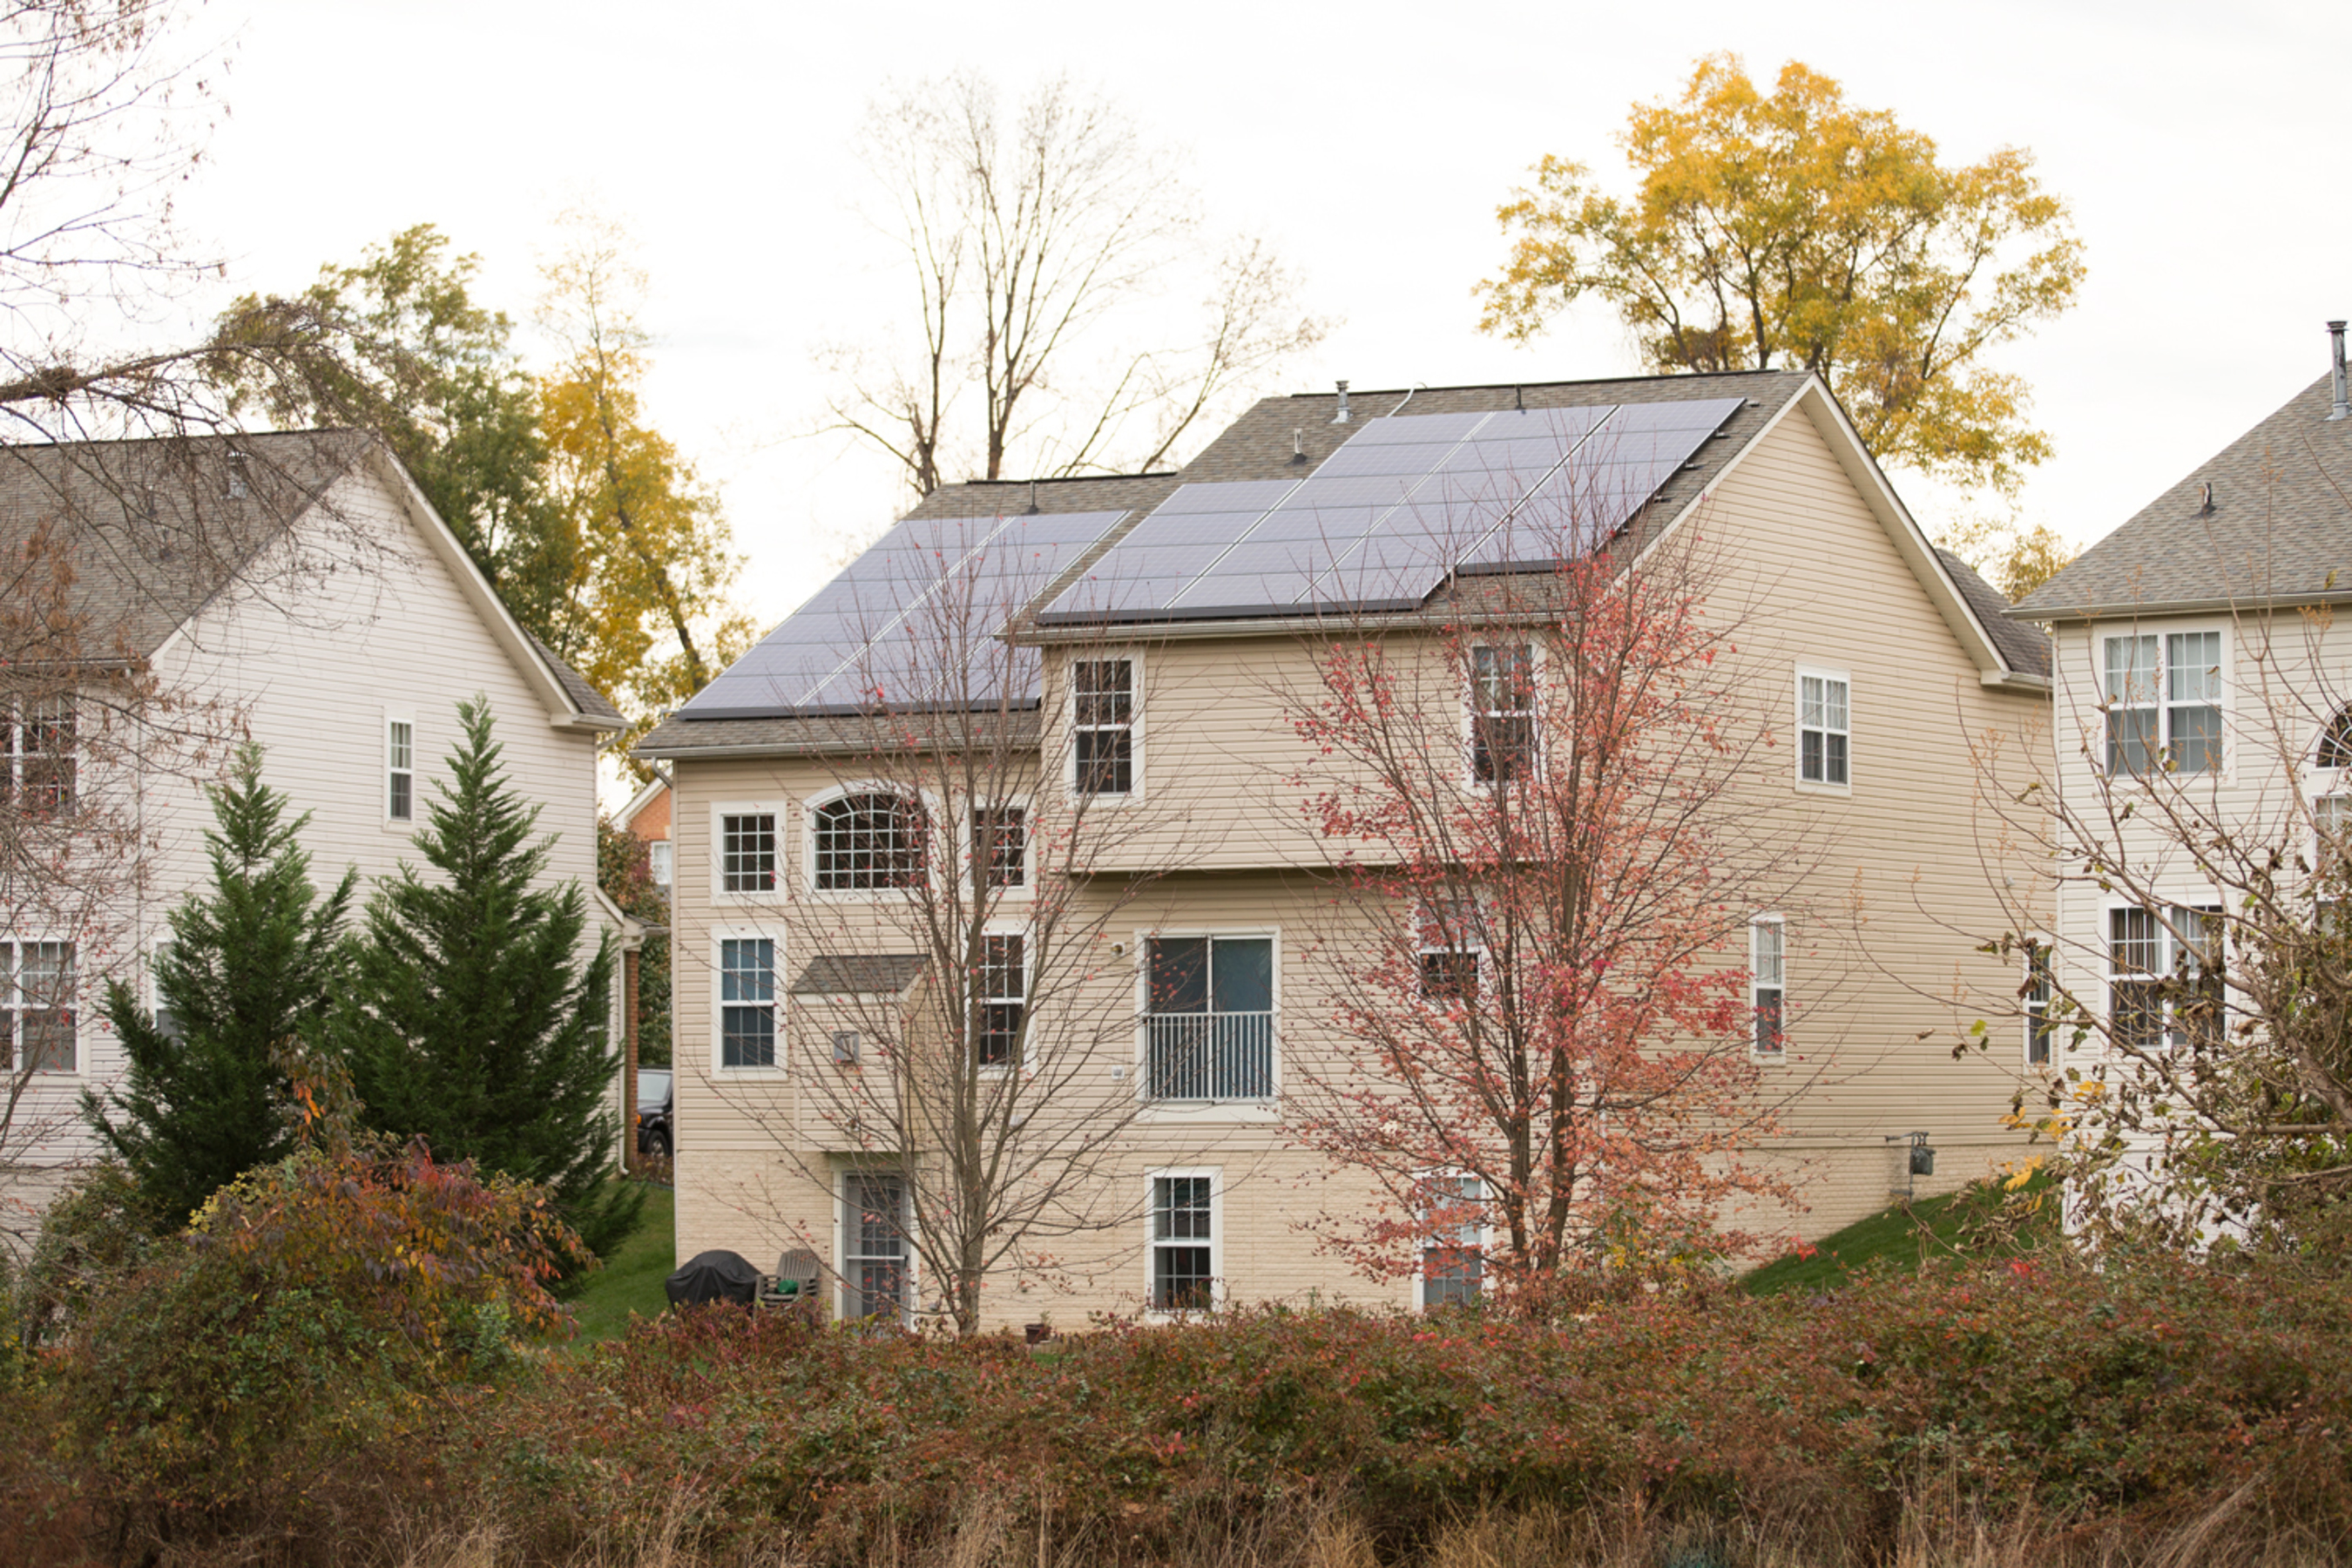 Vivint Solar is now available in the North Baltimore and Frederick areas. (PRNewsFoto/Vivint Solar)